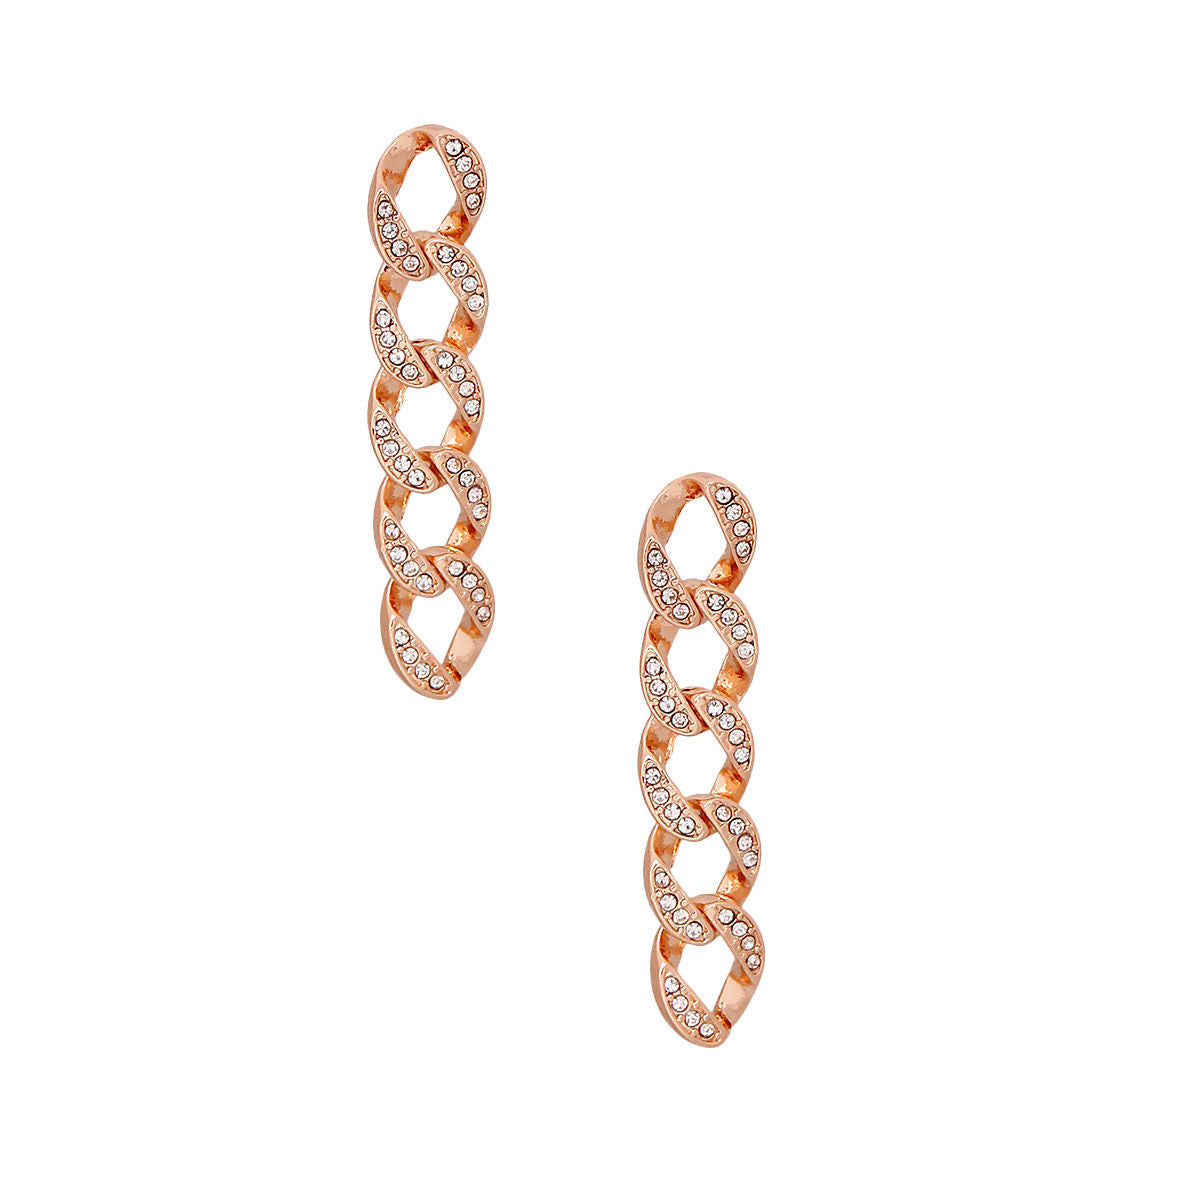 Gold Pave Chain Link Earrings